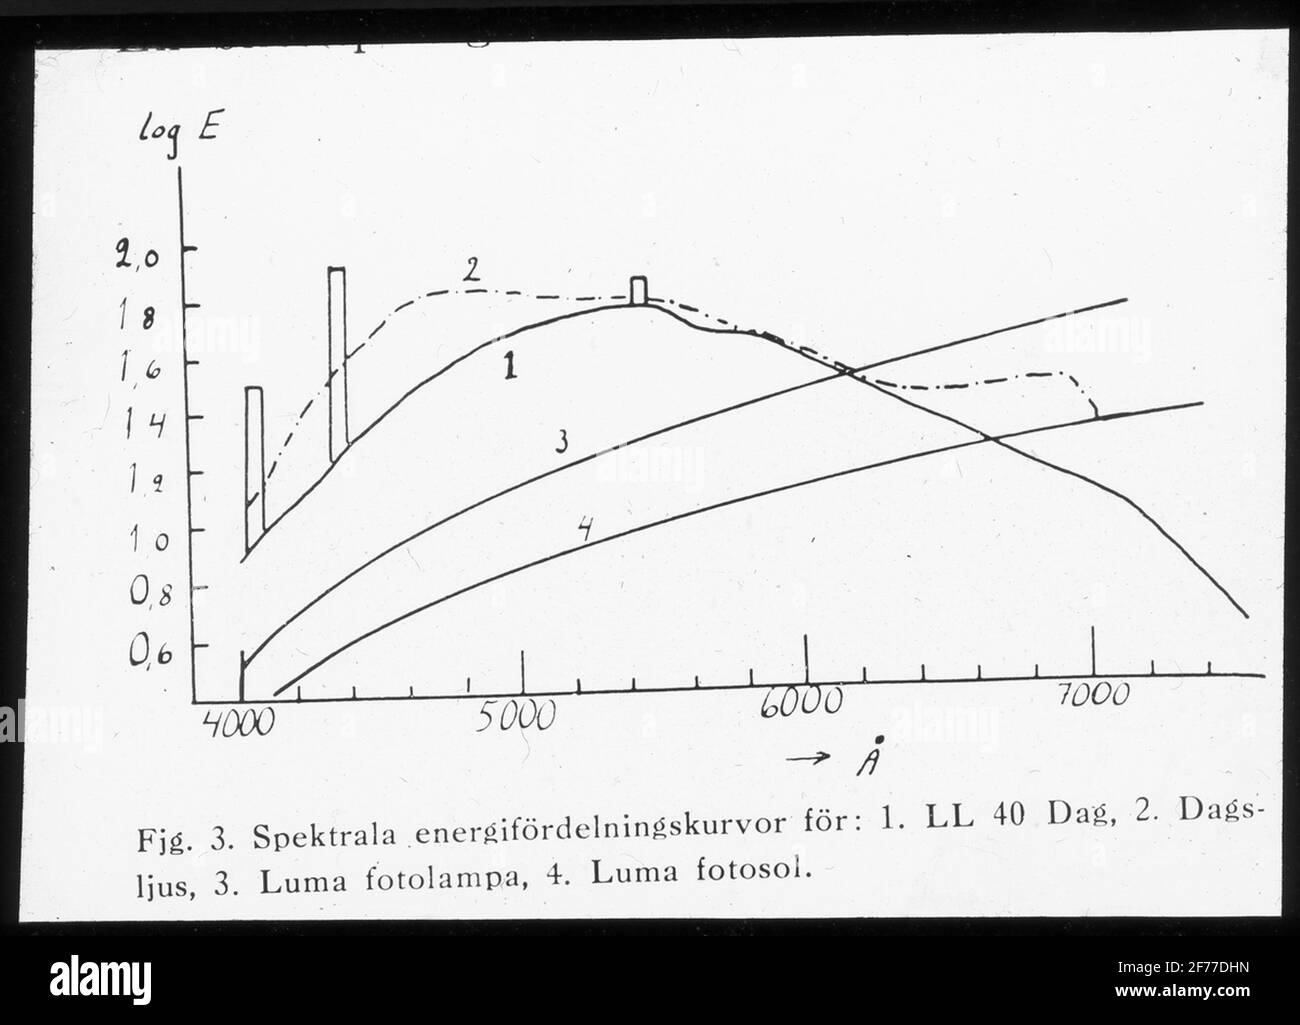 Skiopticon image from the Department of Photography at the Royal Institute of Technology. Use by Professor Helmer Bäckström as lecture material. Bäckström was Sweden's first professor in photography at the Royal Institute of Technology in Stockholm 1948-1958.spectral energy distribution curves. Stock Photo